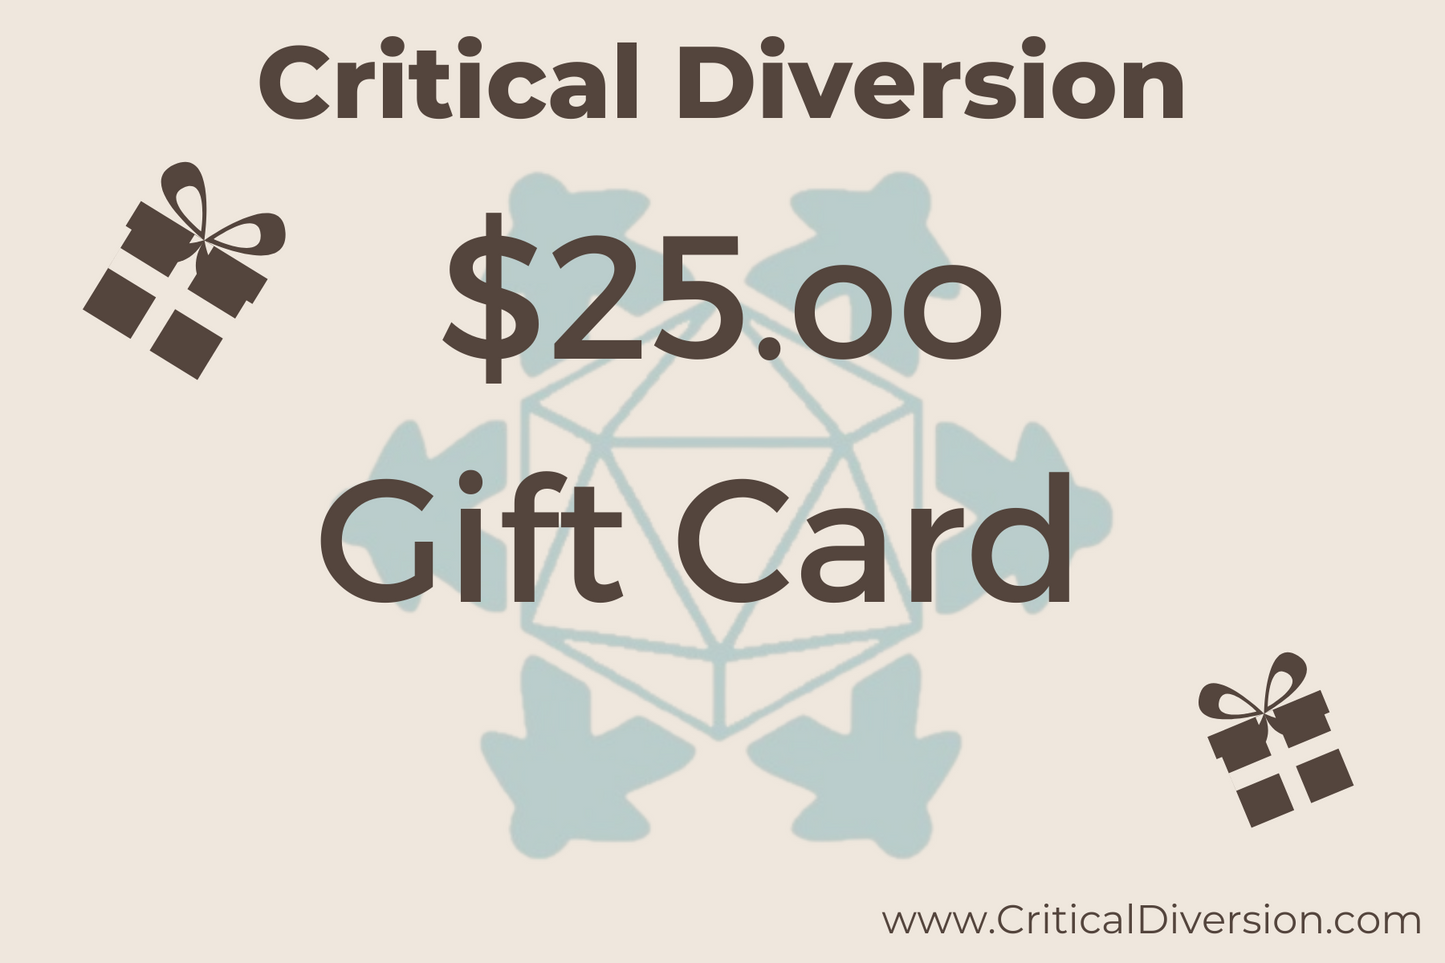 Critical Diversion gift card